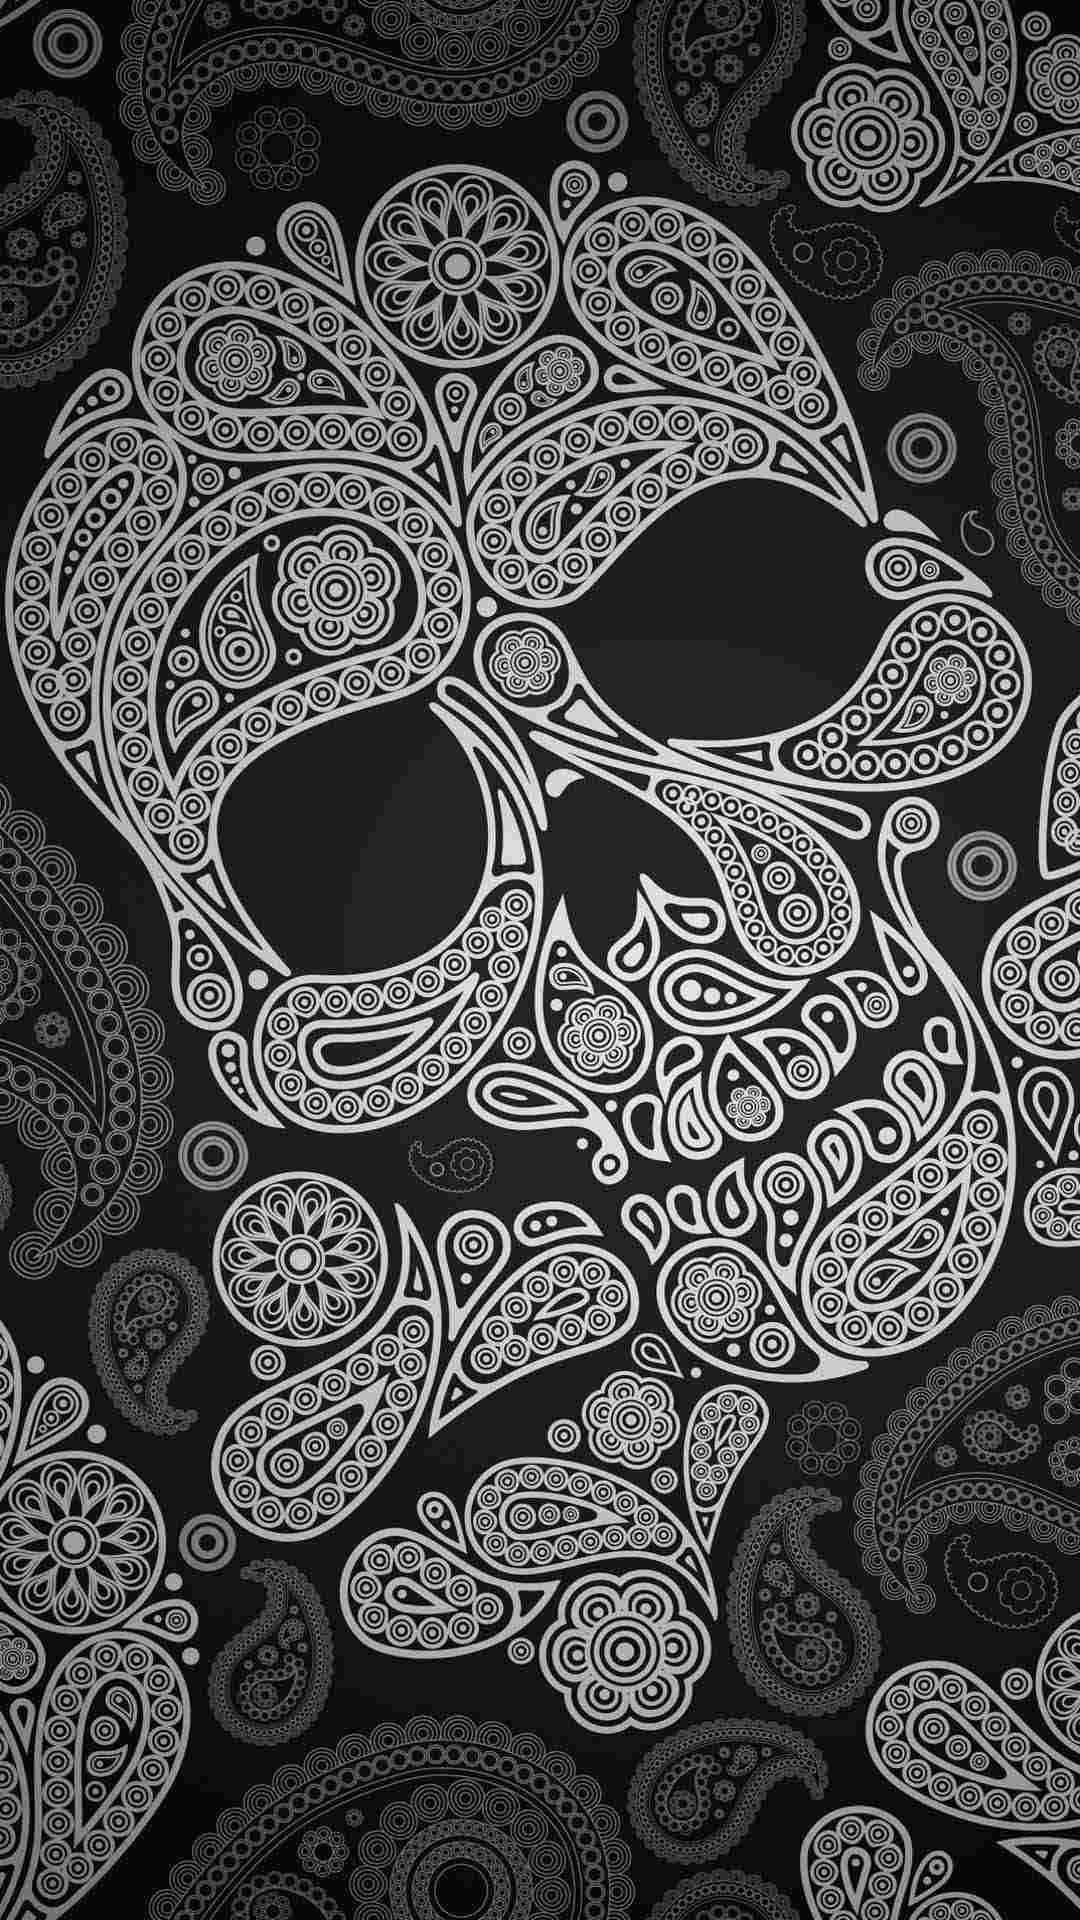 A Black And White Skull With Paisley Pattern Wallpaper